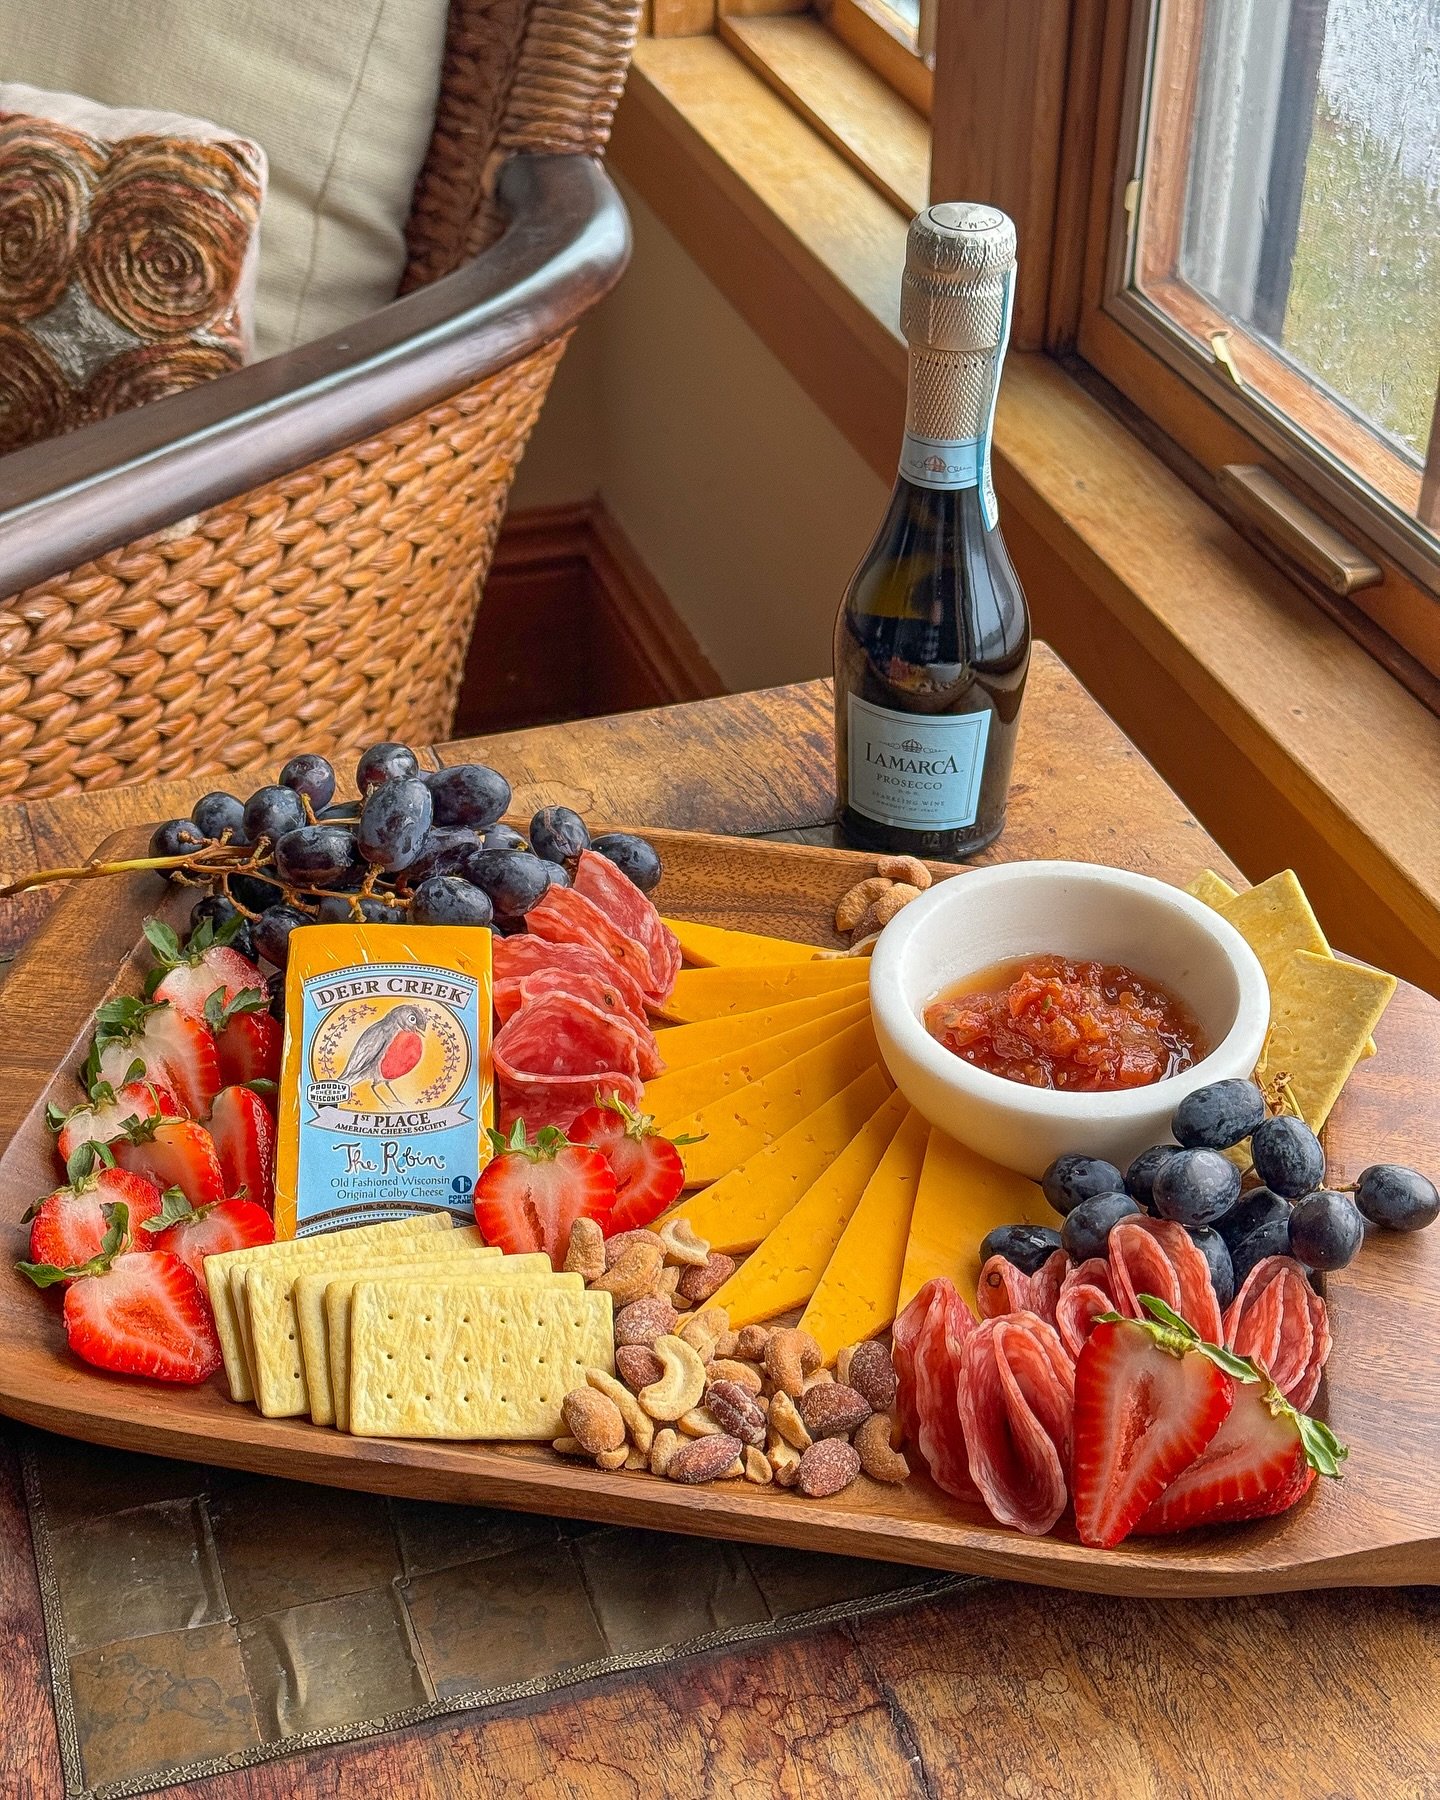 Rainy days call for a sunny pick-me-up! 😉 Grab a split of Prosecco, The Robin, and throw together a spread to snack on. Here&rsquo;s what we included: 

☀️ Black Seedless Grapes
☀️ Applewood Smoked Salami
☀️ @quinceandapple Tomato and Fennel Jam
☀️ 